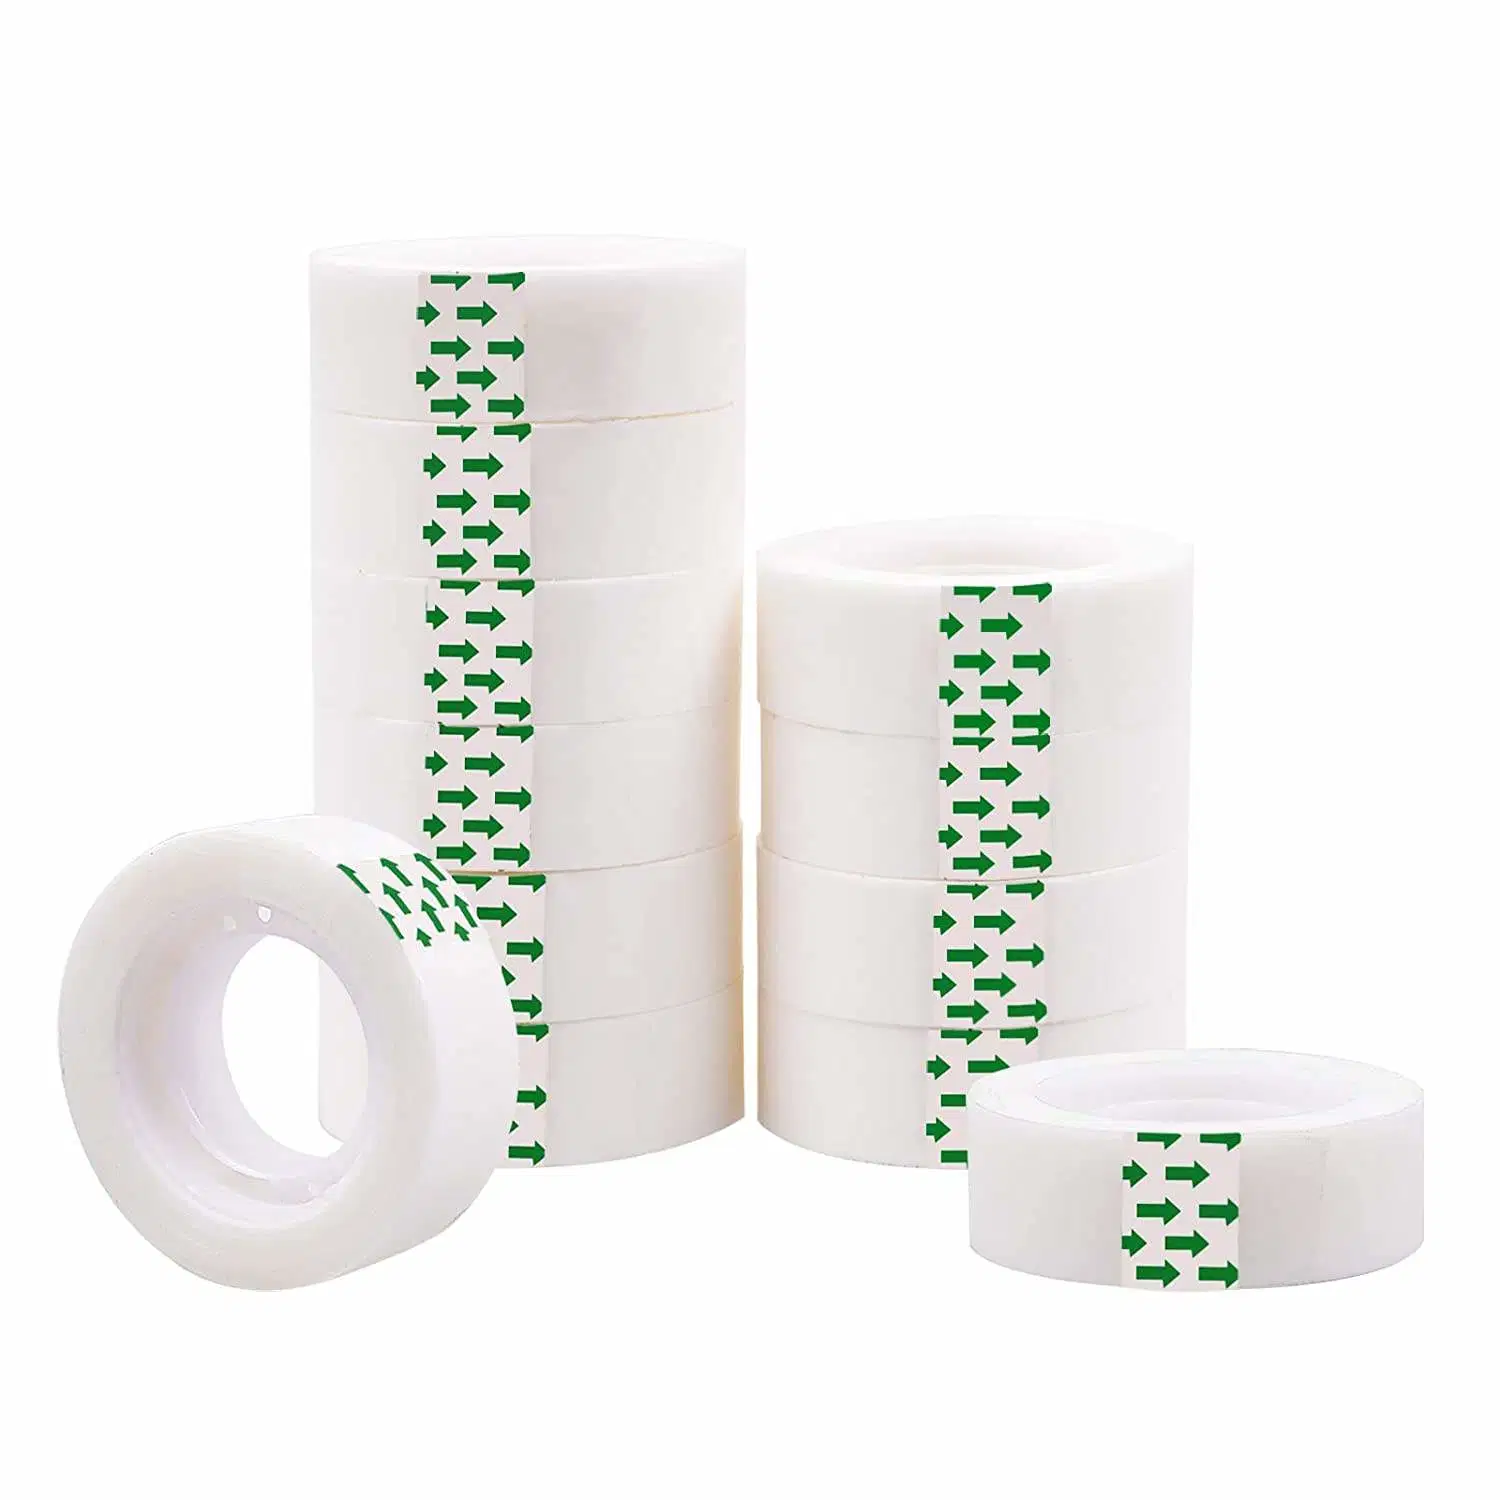 Invisible Stationery Transparent Tape for Office Home School Numerous Applications